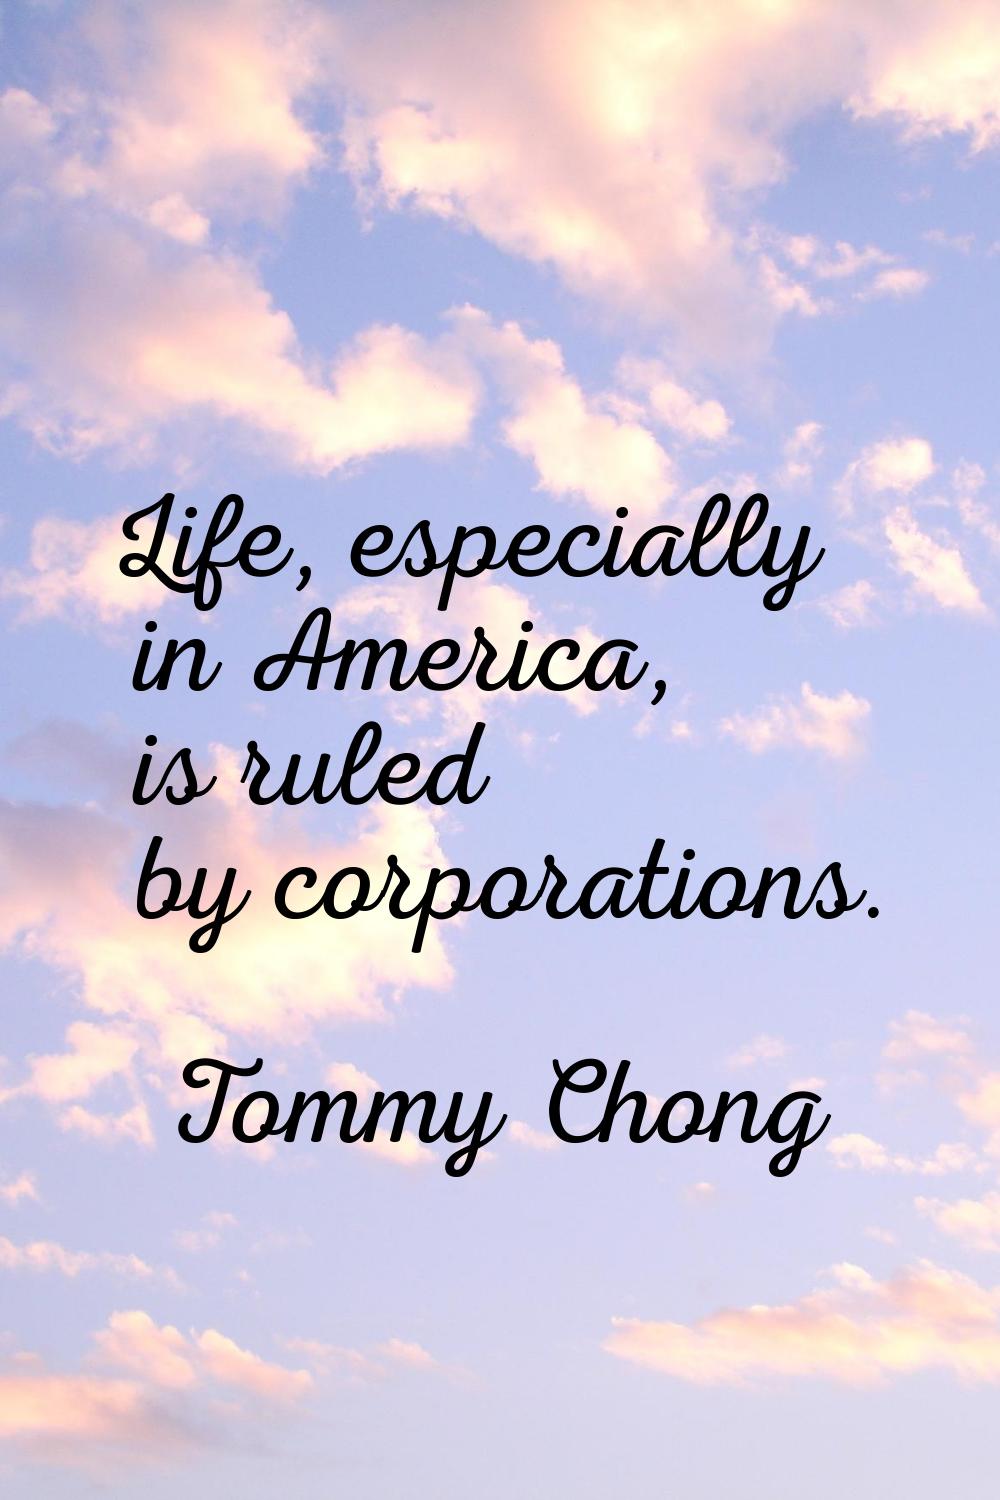 Life, especially in America, is ruled by corporations.